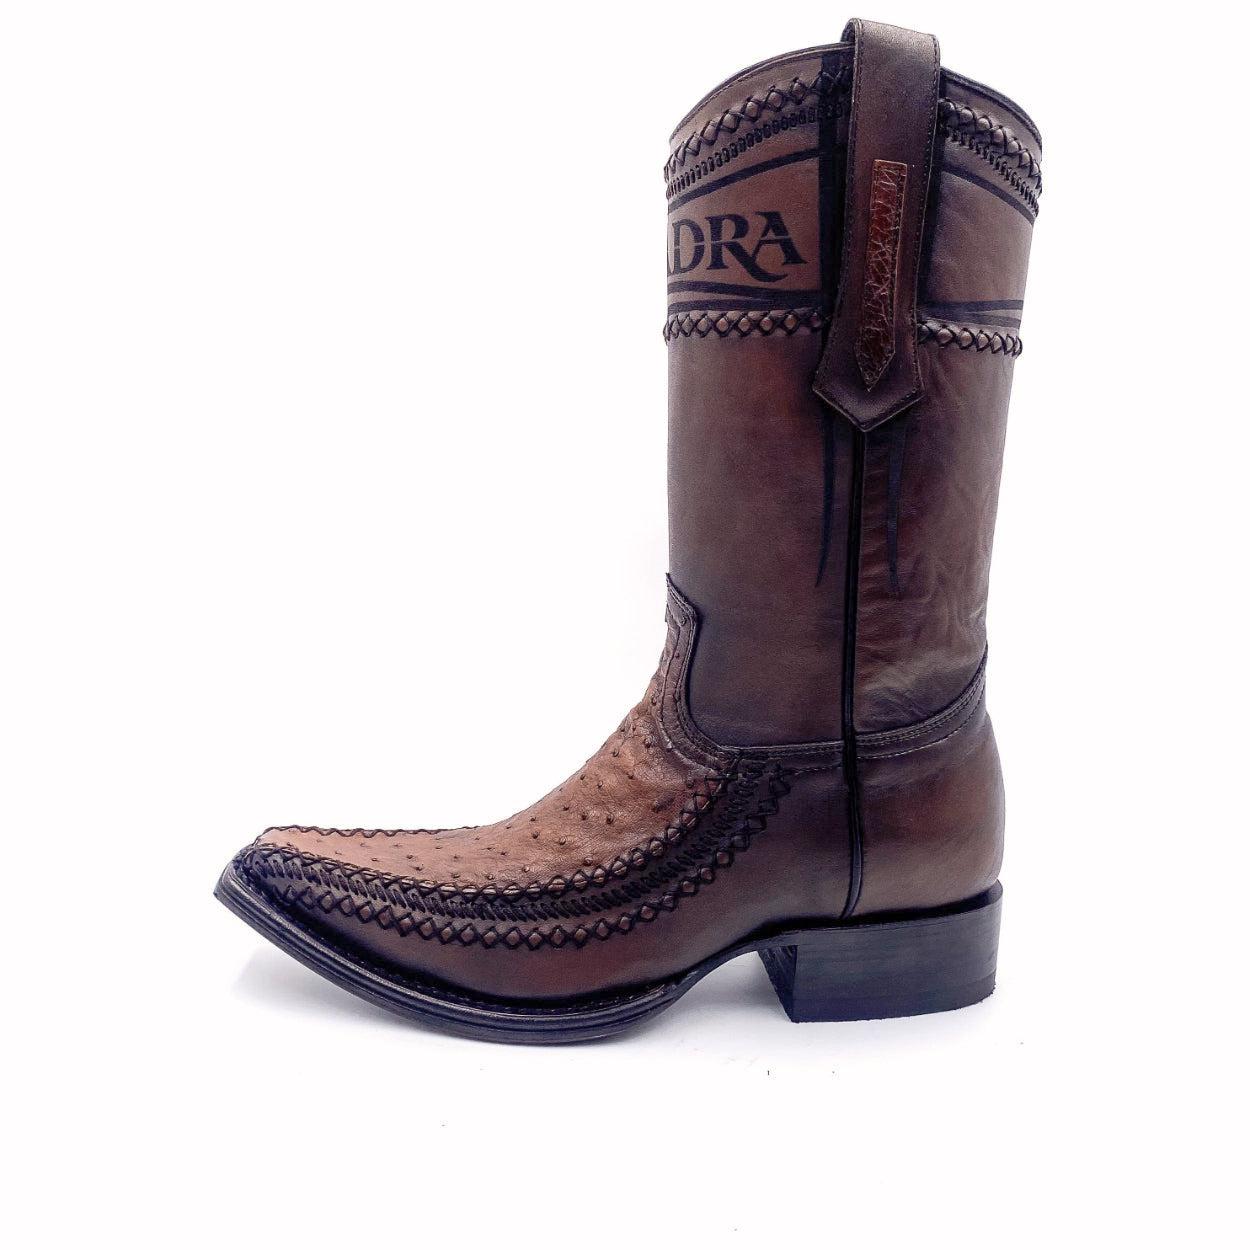 1B1AA1 - Cuadra honey casual fashion cowboy ostrich leather boots for men-Kuet.us